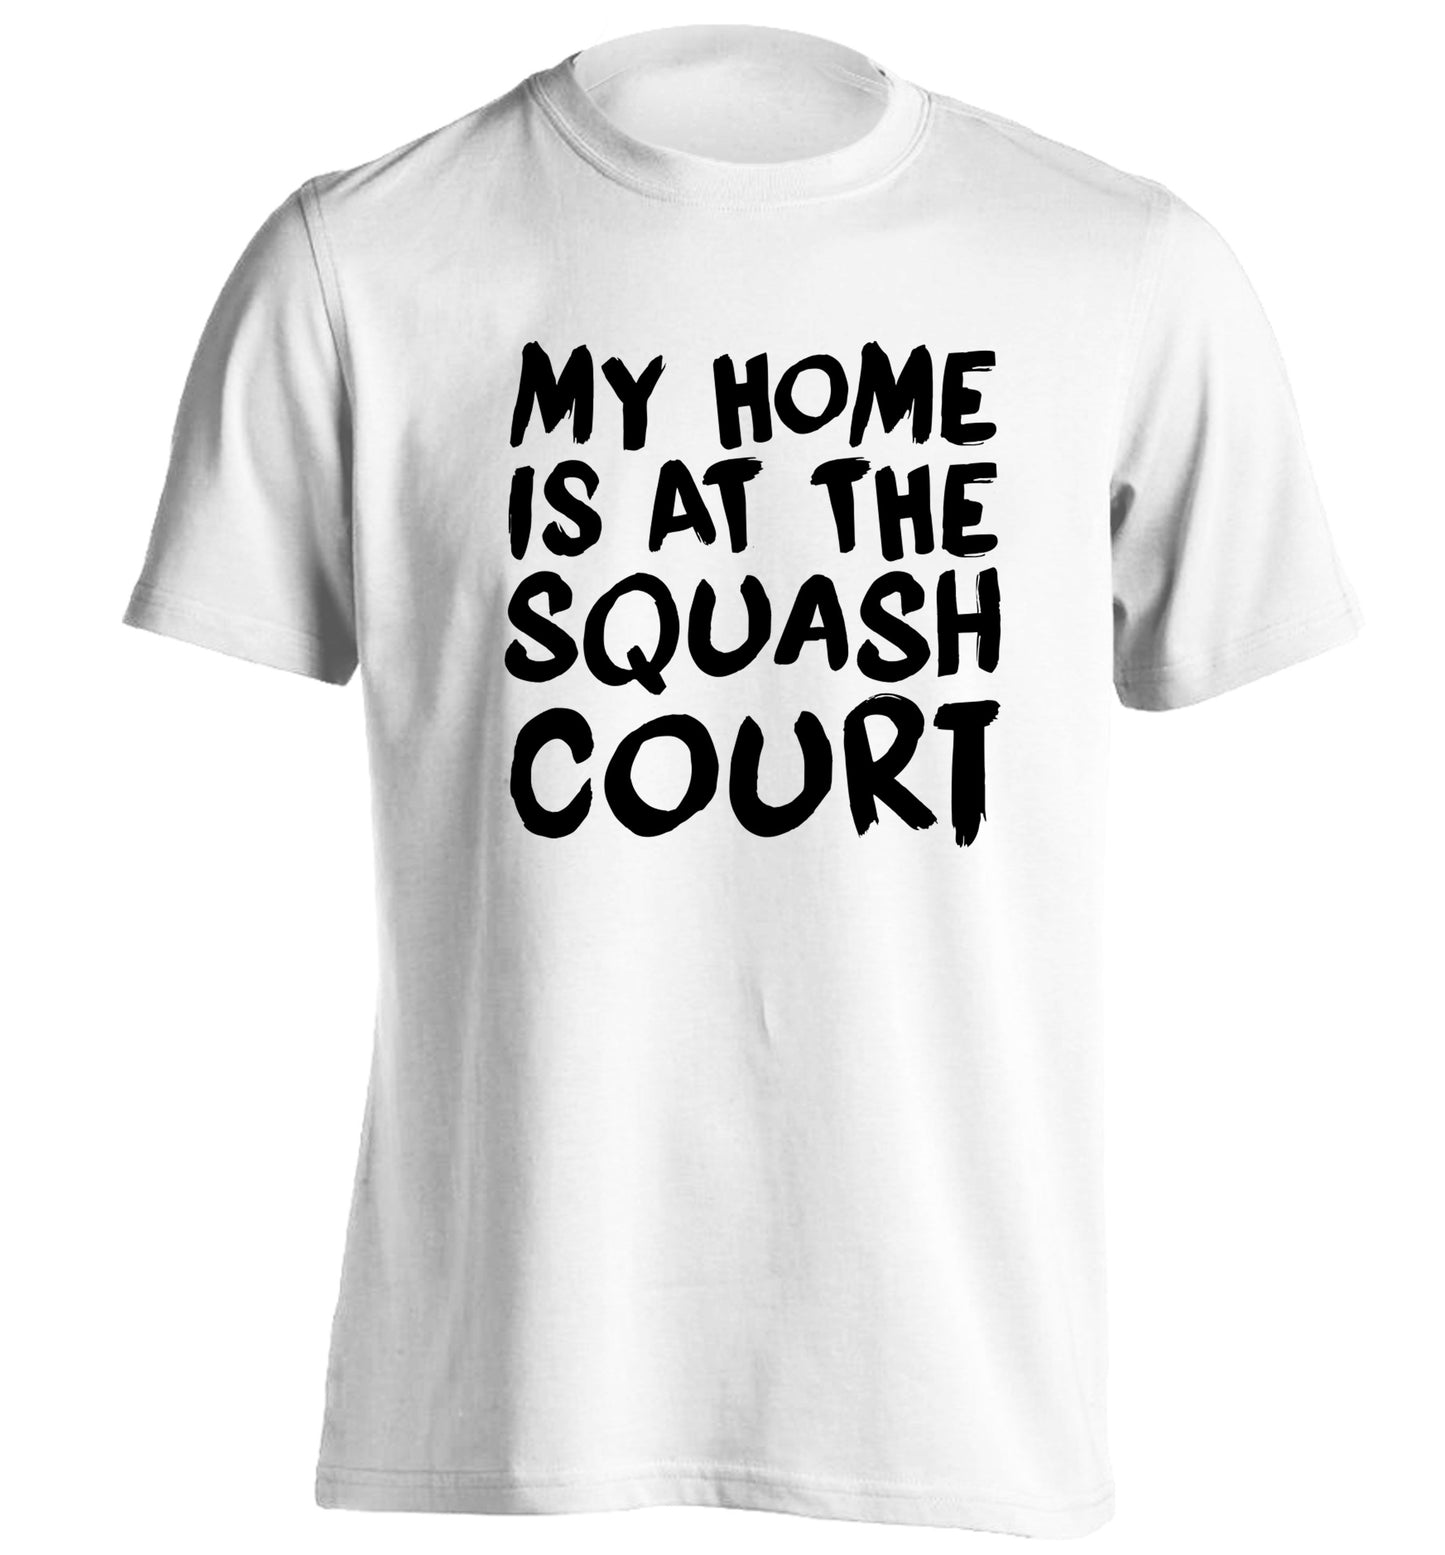 My home is at the squash court adults unisex white Tshirt 2XL